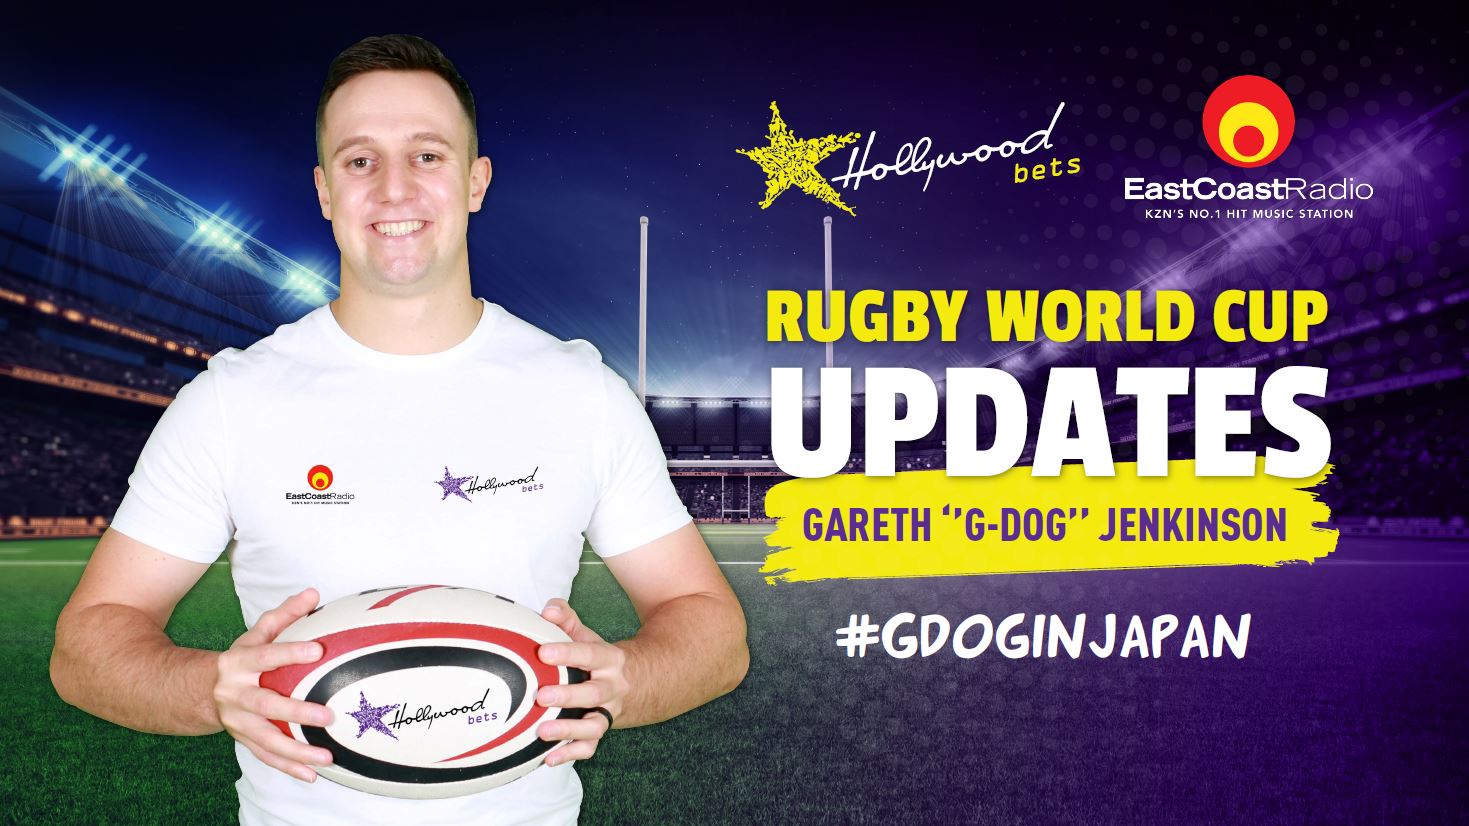 Rugby World Cup 2019 updates with Gareth Jenkinson - #GDogInJapan